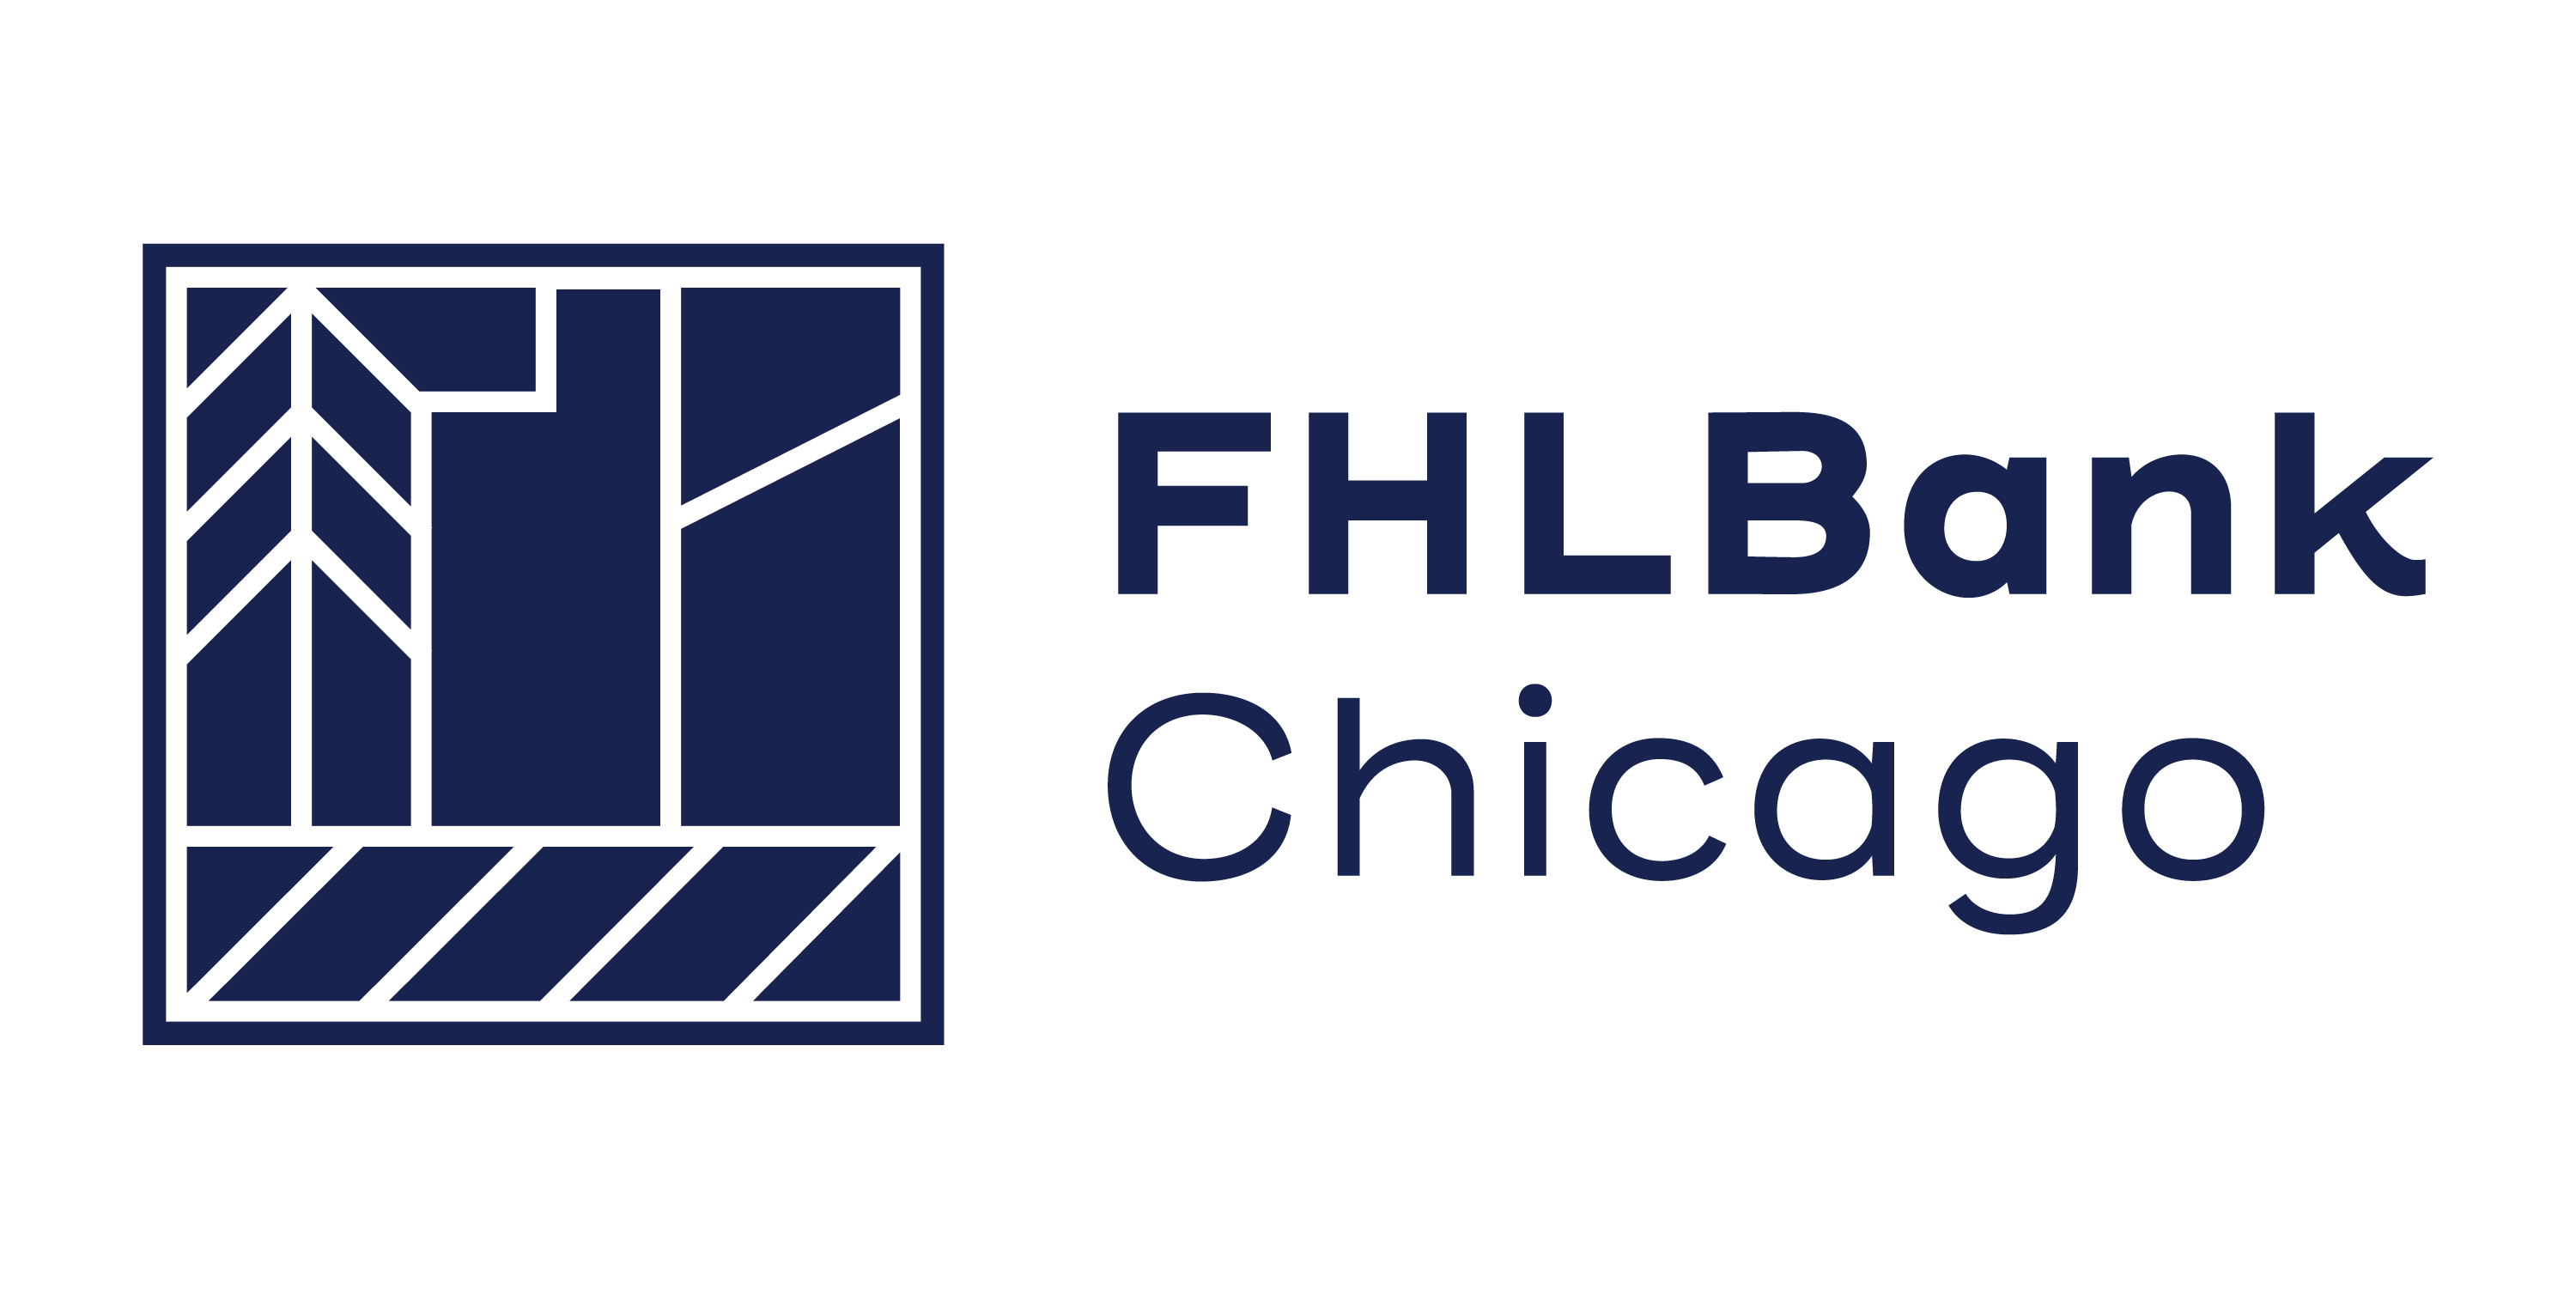 Cinnaire Granted Five Affordable Housing Program (AHP) Awards totaling $3.2 Million  by the Federal Home Loan Bank of Chicago